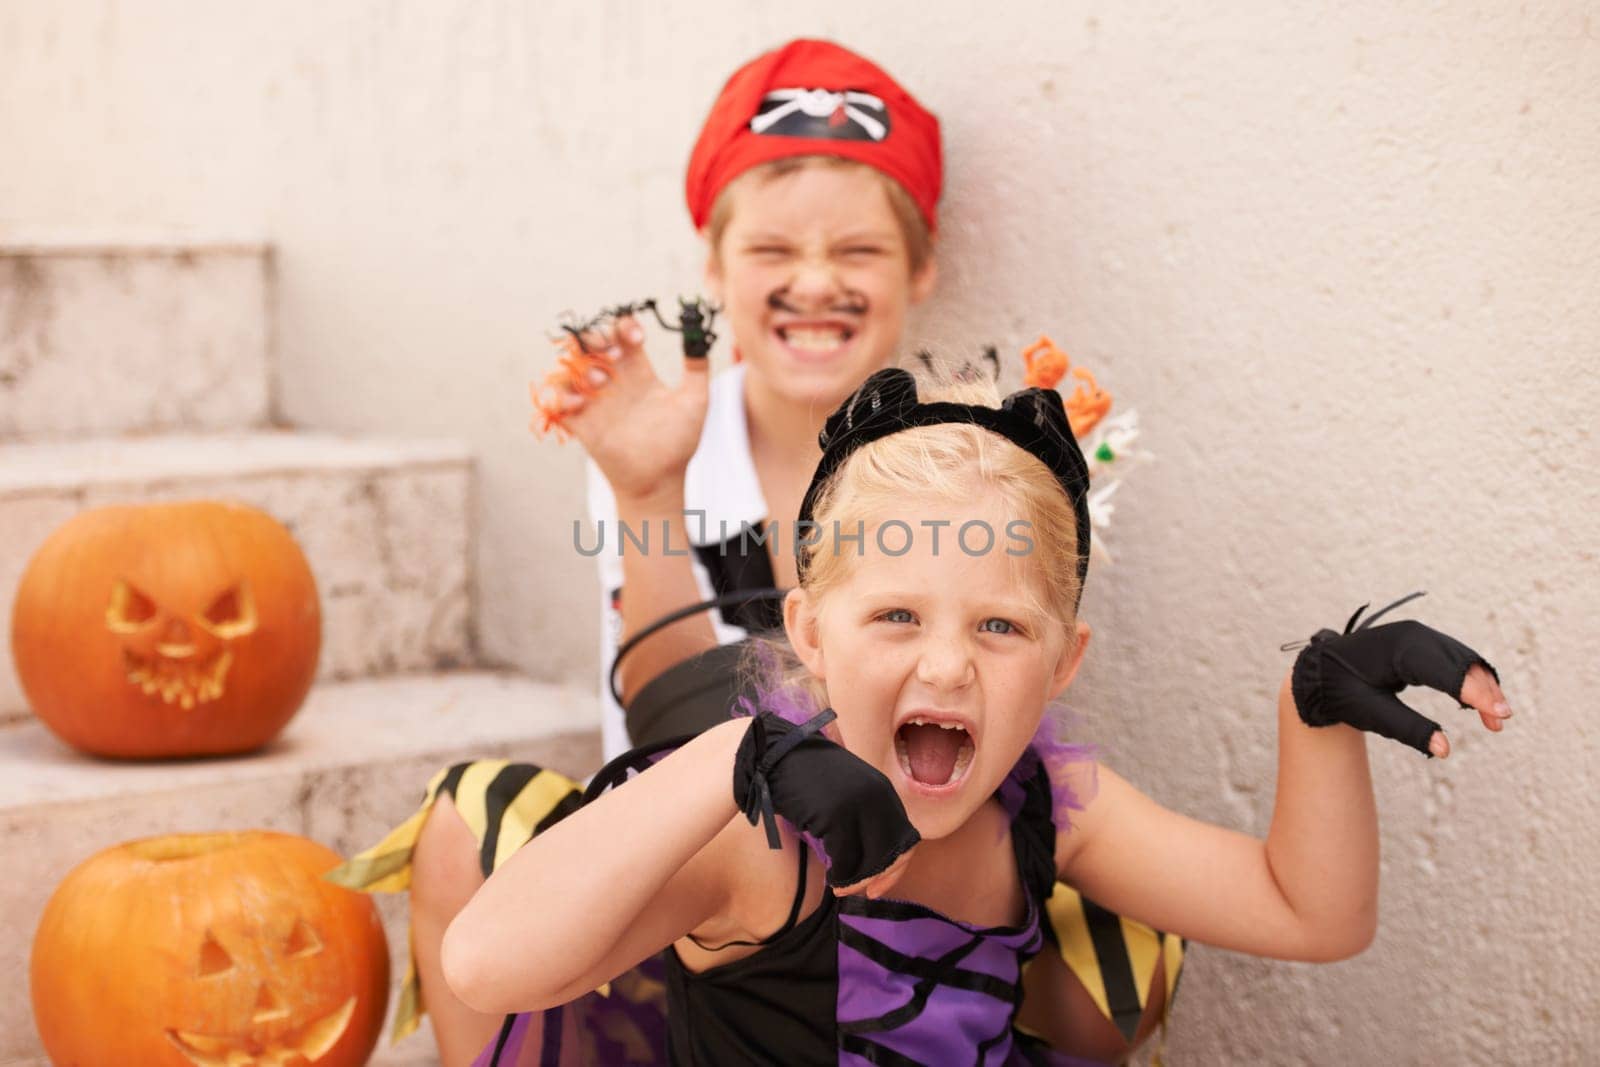 Siblings, portrait and halloween costume by outdoor, theme paint and happiness in childhood. Boy, girl or scary face for holiday party event with pumpkin, excited fairy or pirate by backyard stairs by YuriArcurs